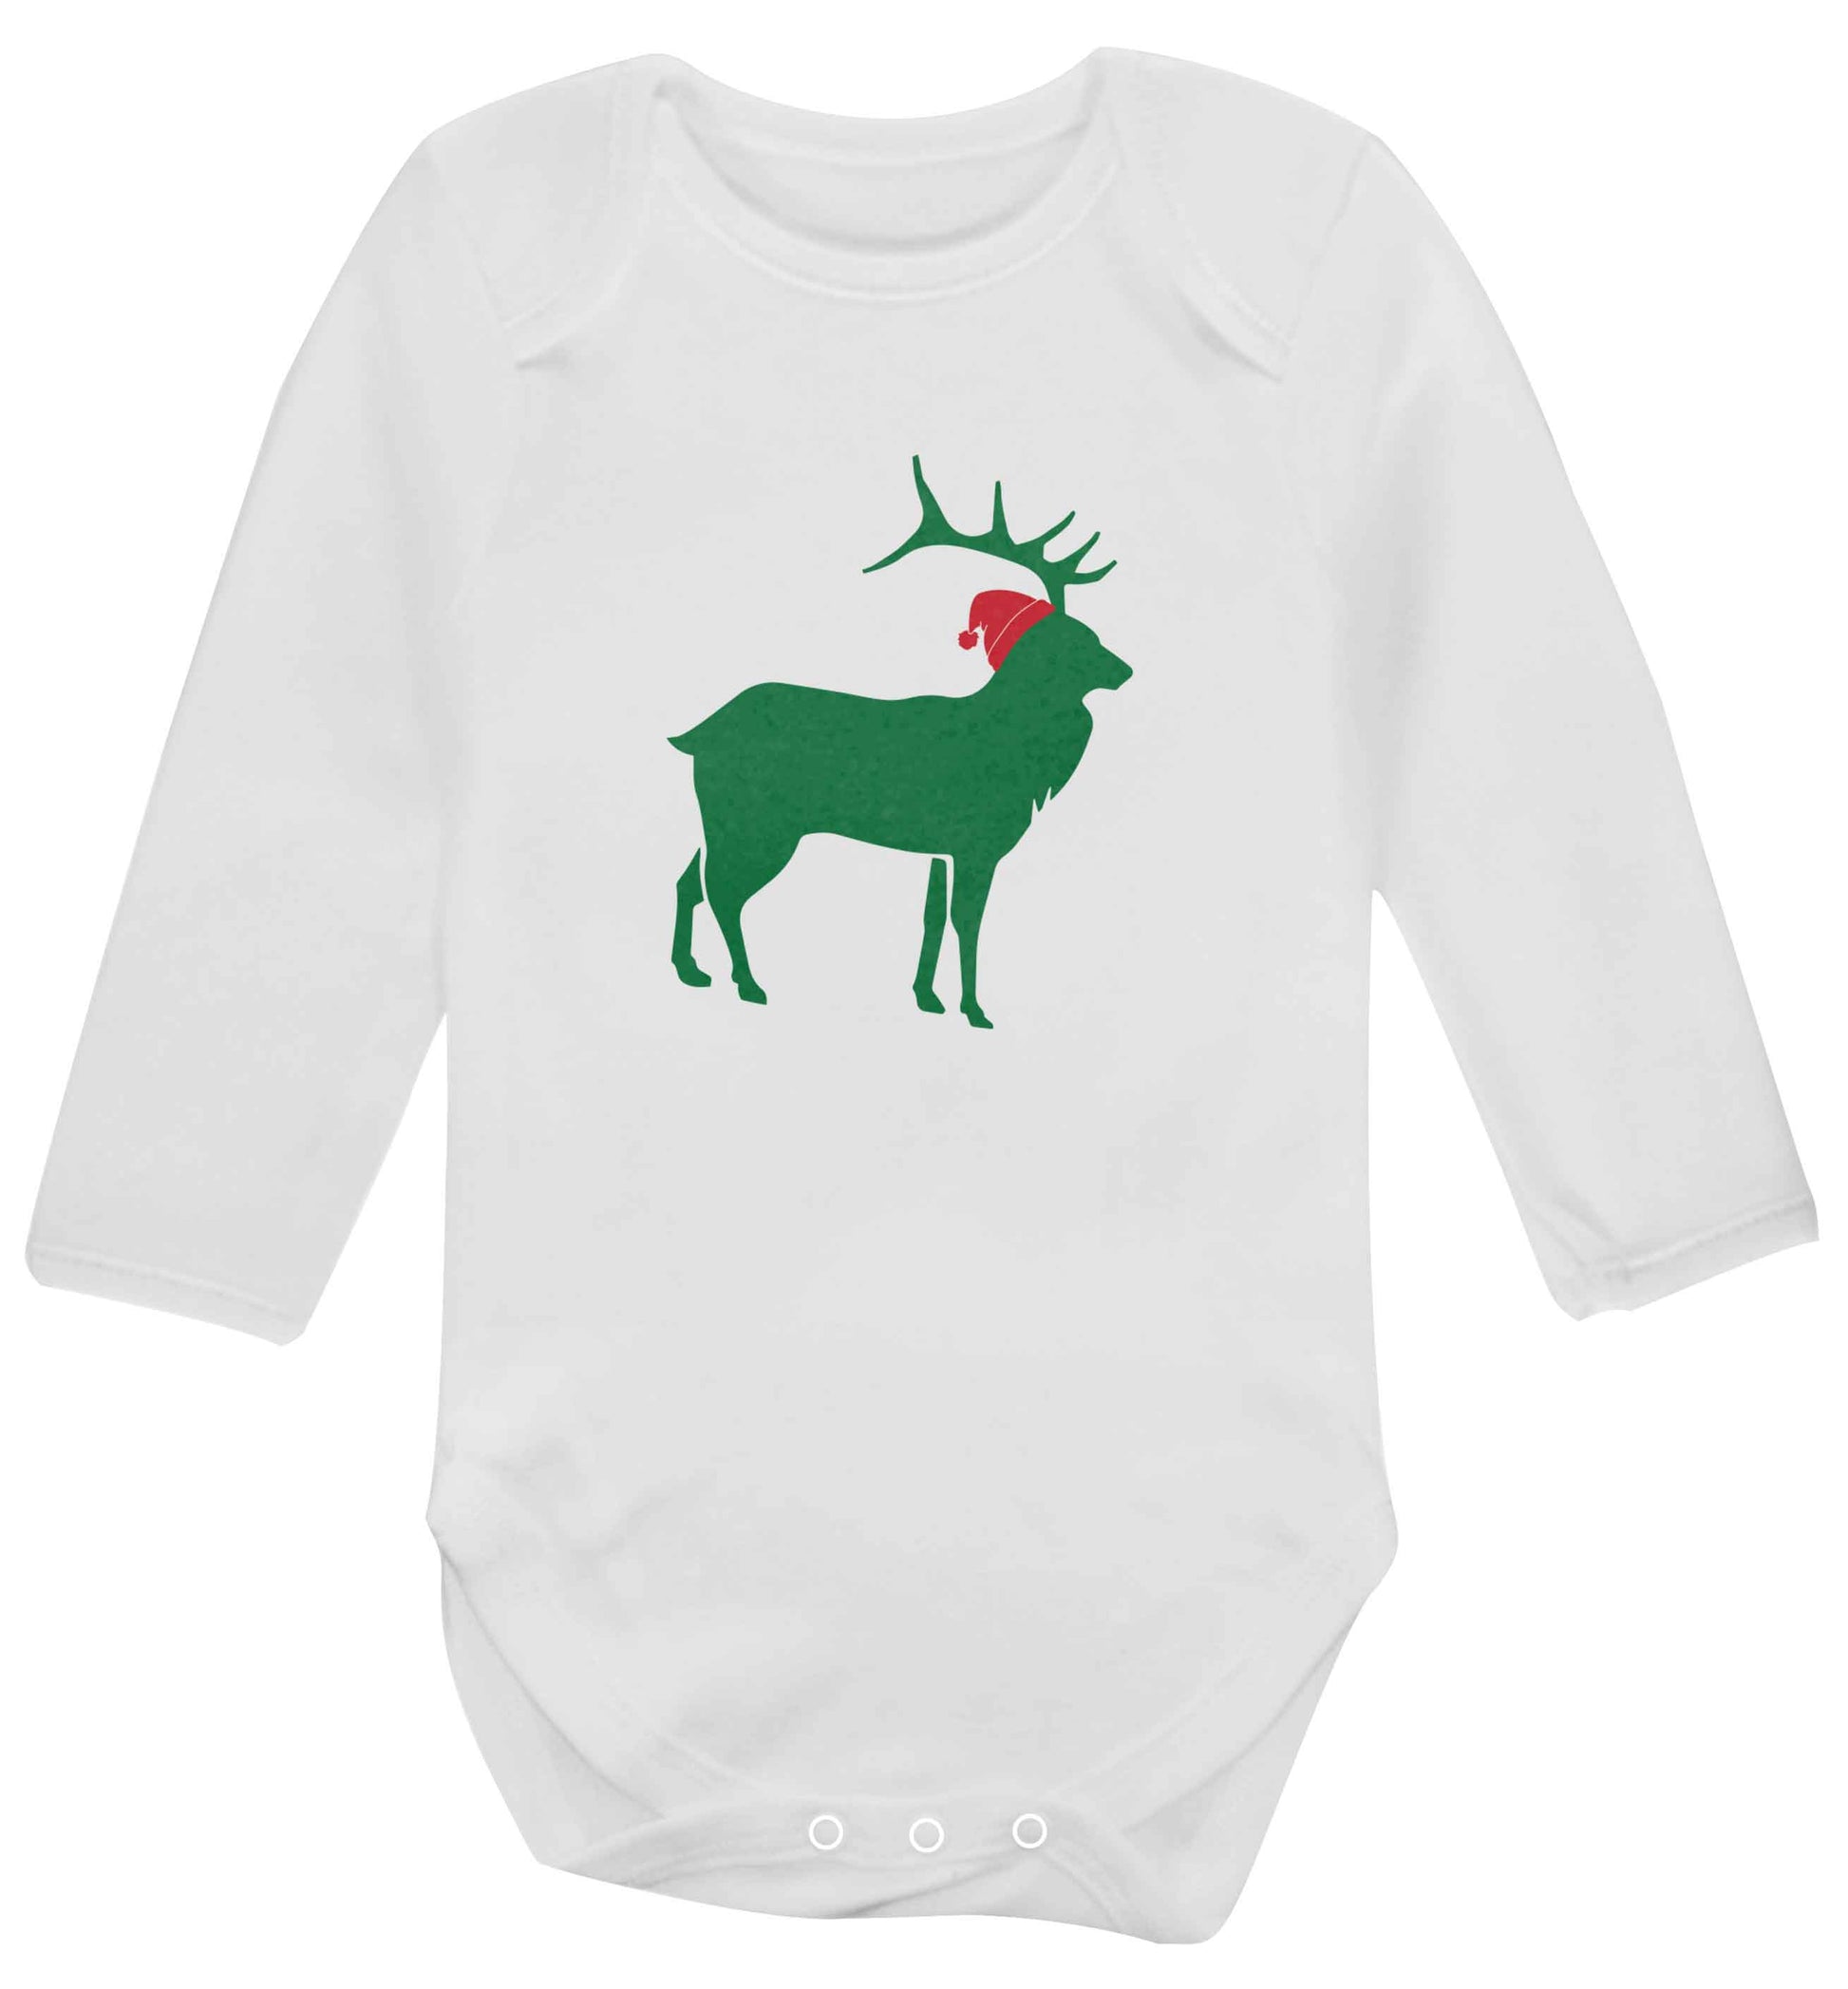 Green stag Santa baby vest long sleeved white 6-12 months